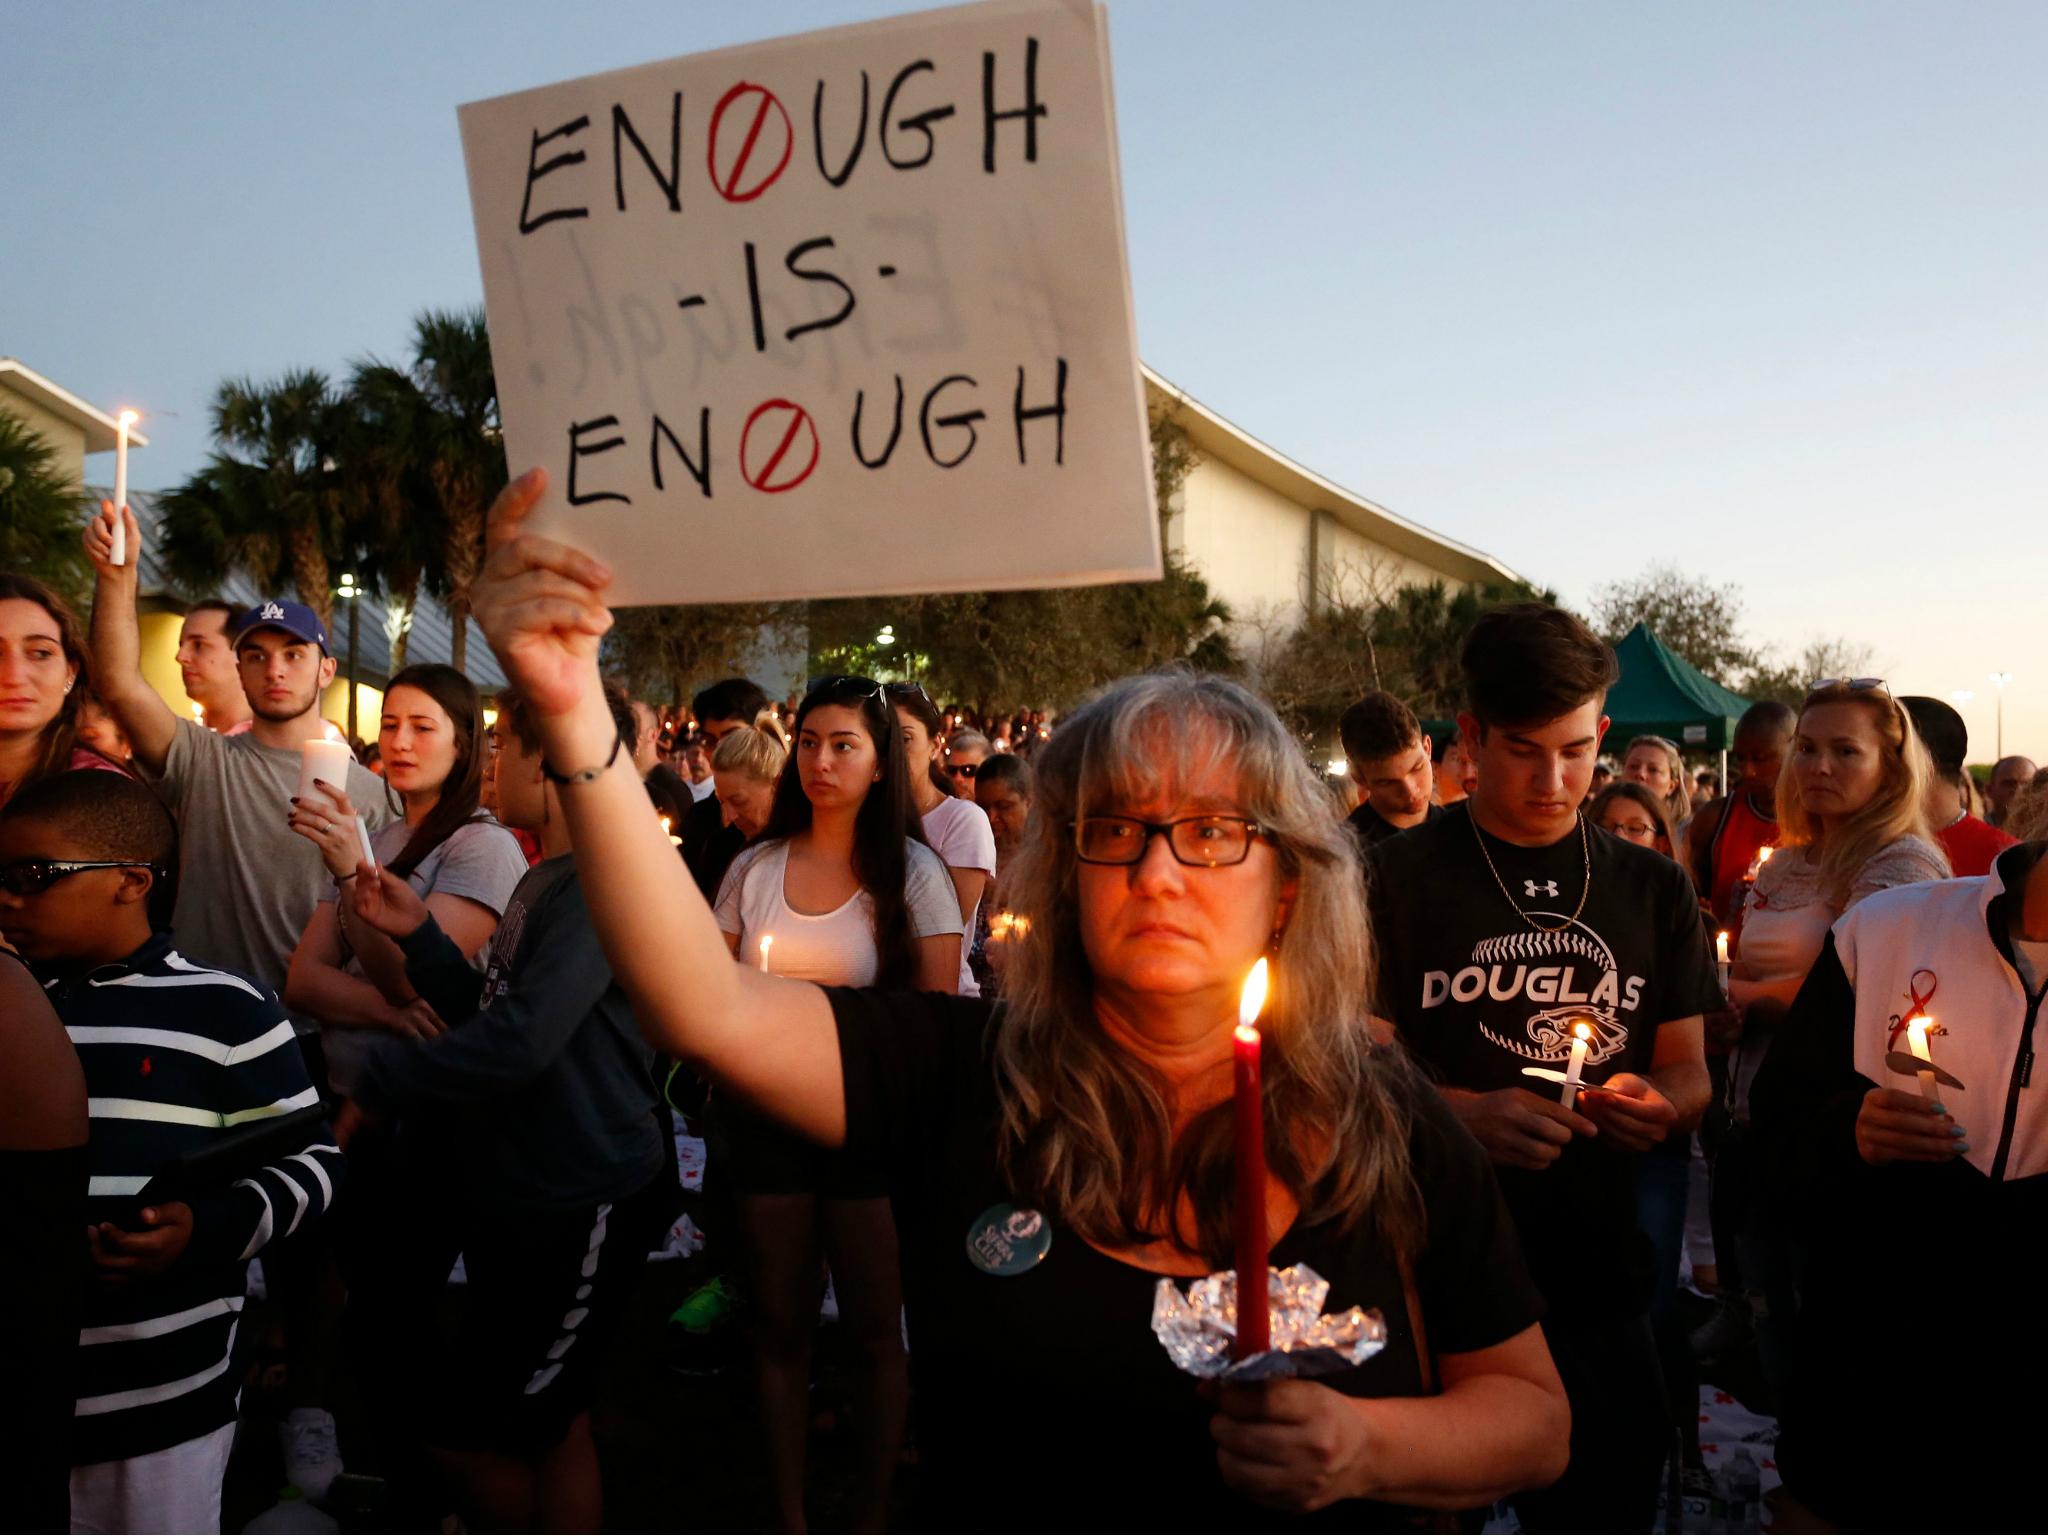 If enough Americans protest for more restrictive gun laws, hopefully school shootings will seize to exist.